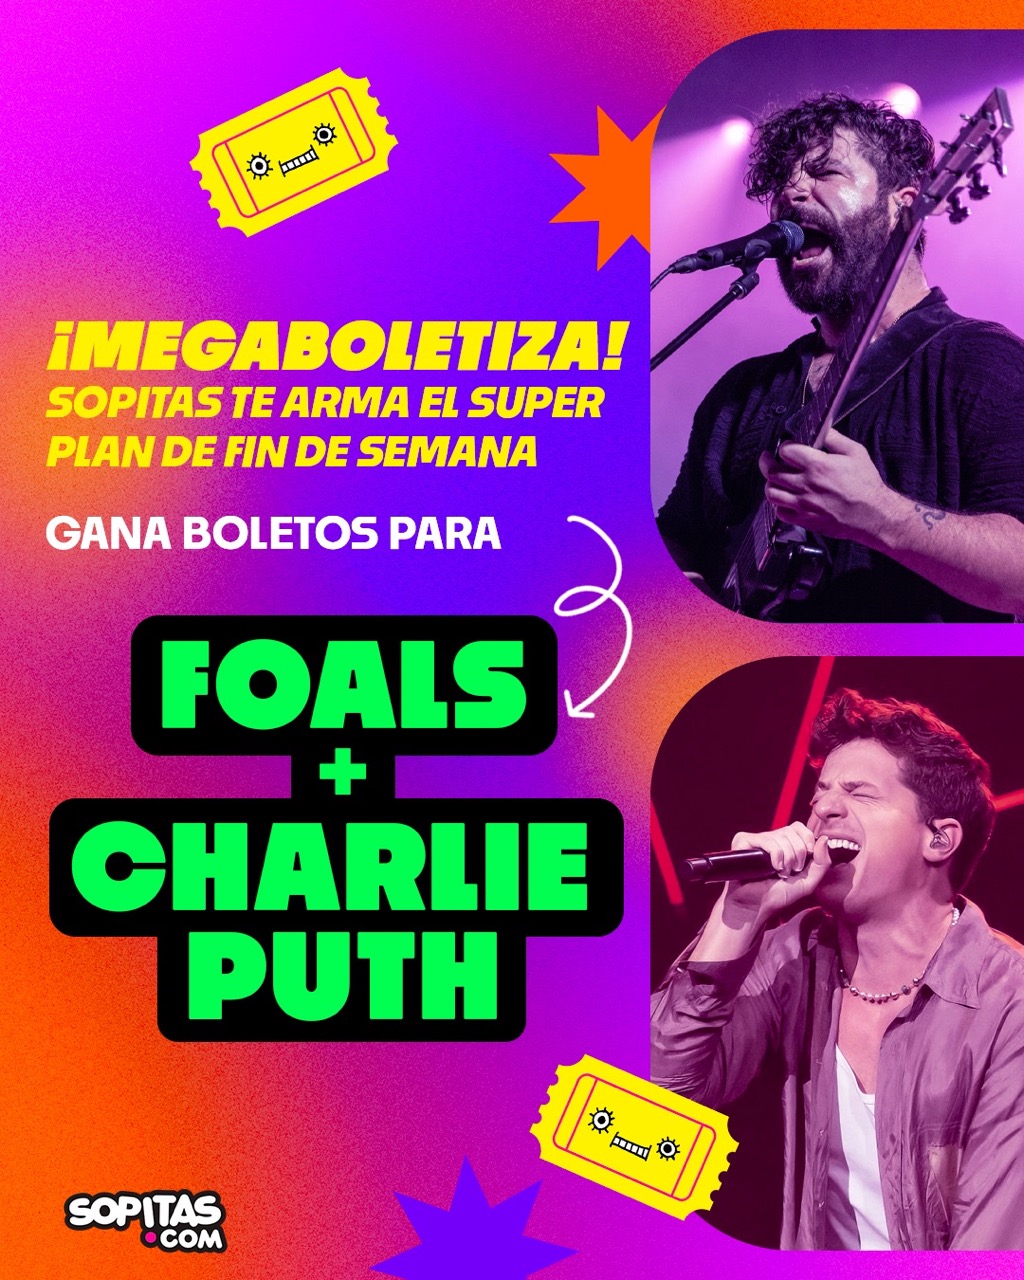 Win tickets for the Foals and Charlie Puth concerts in CDMX 